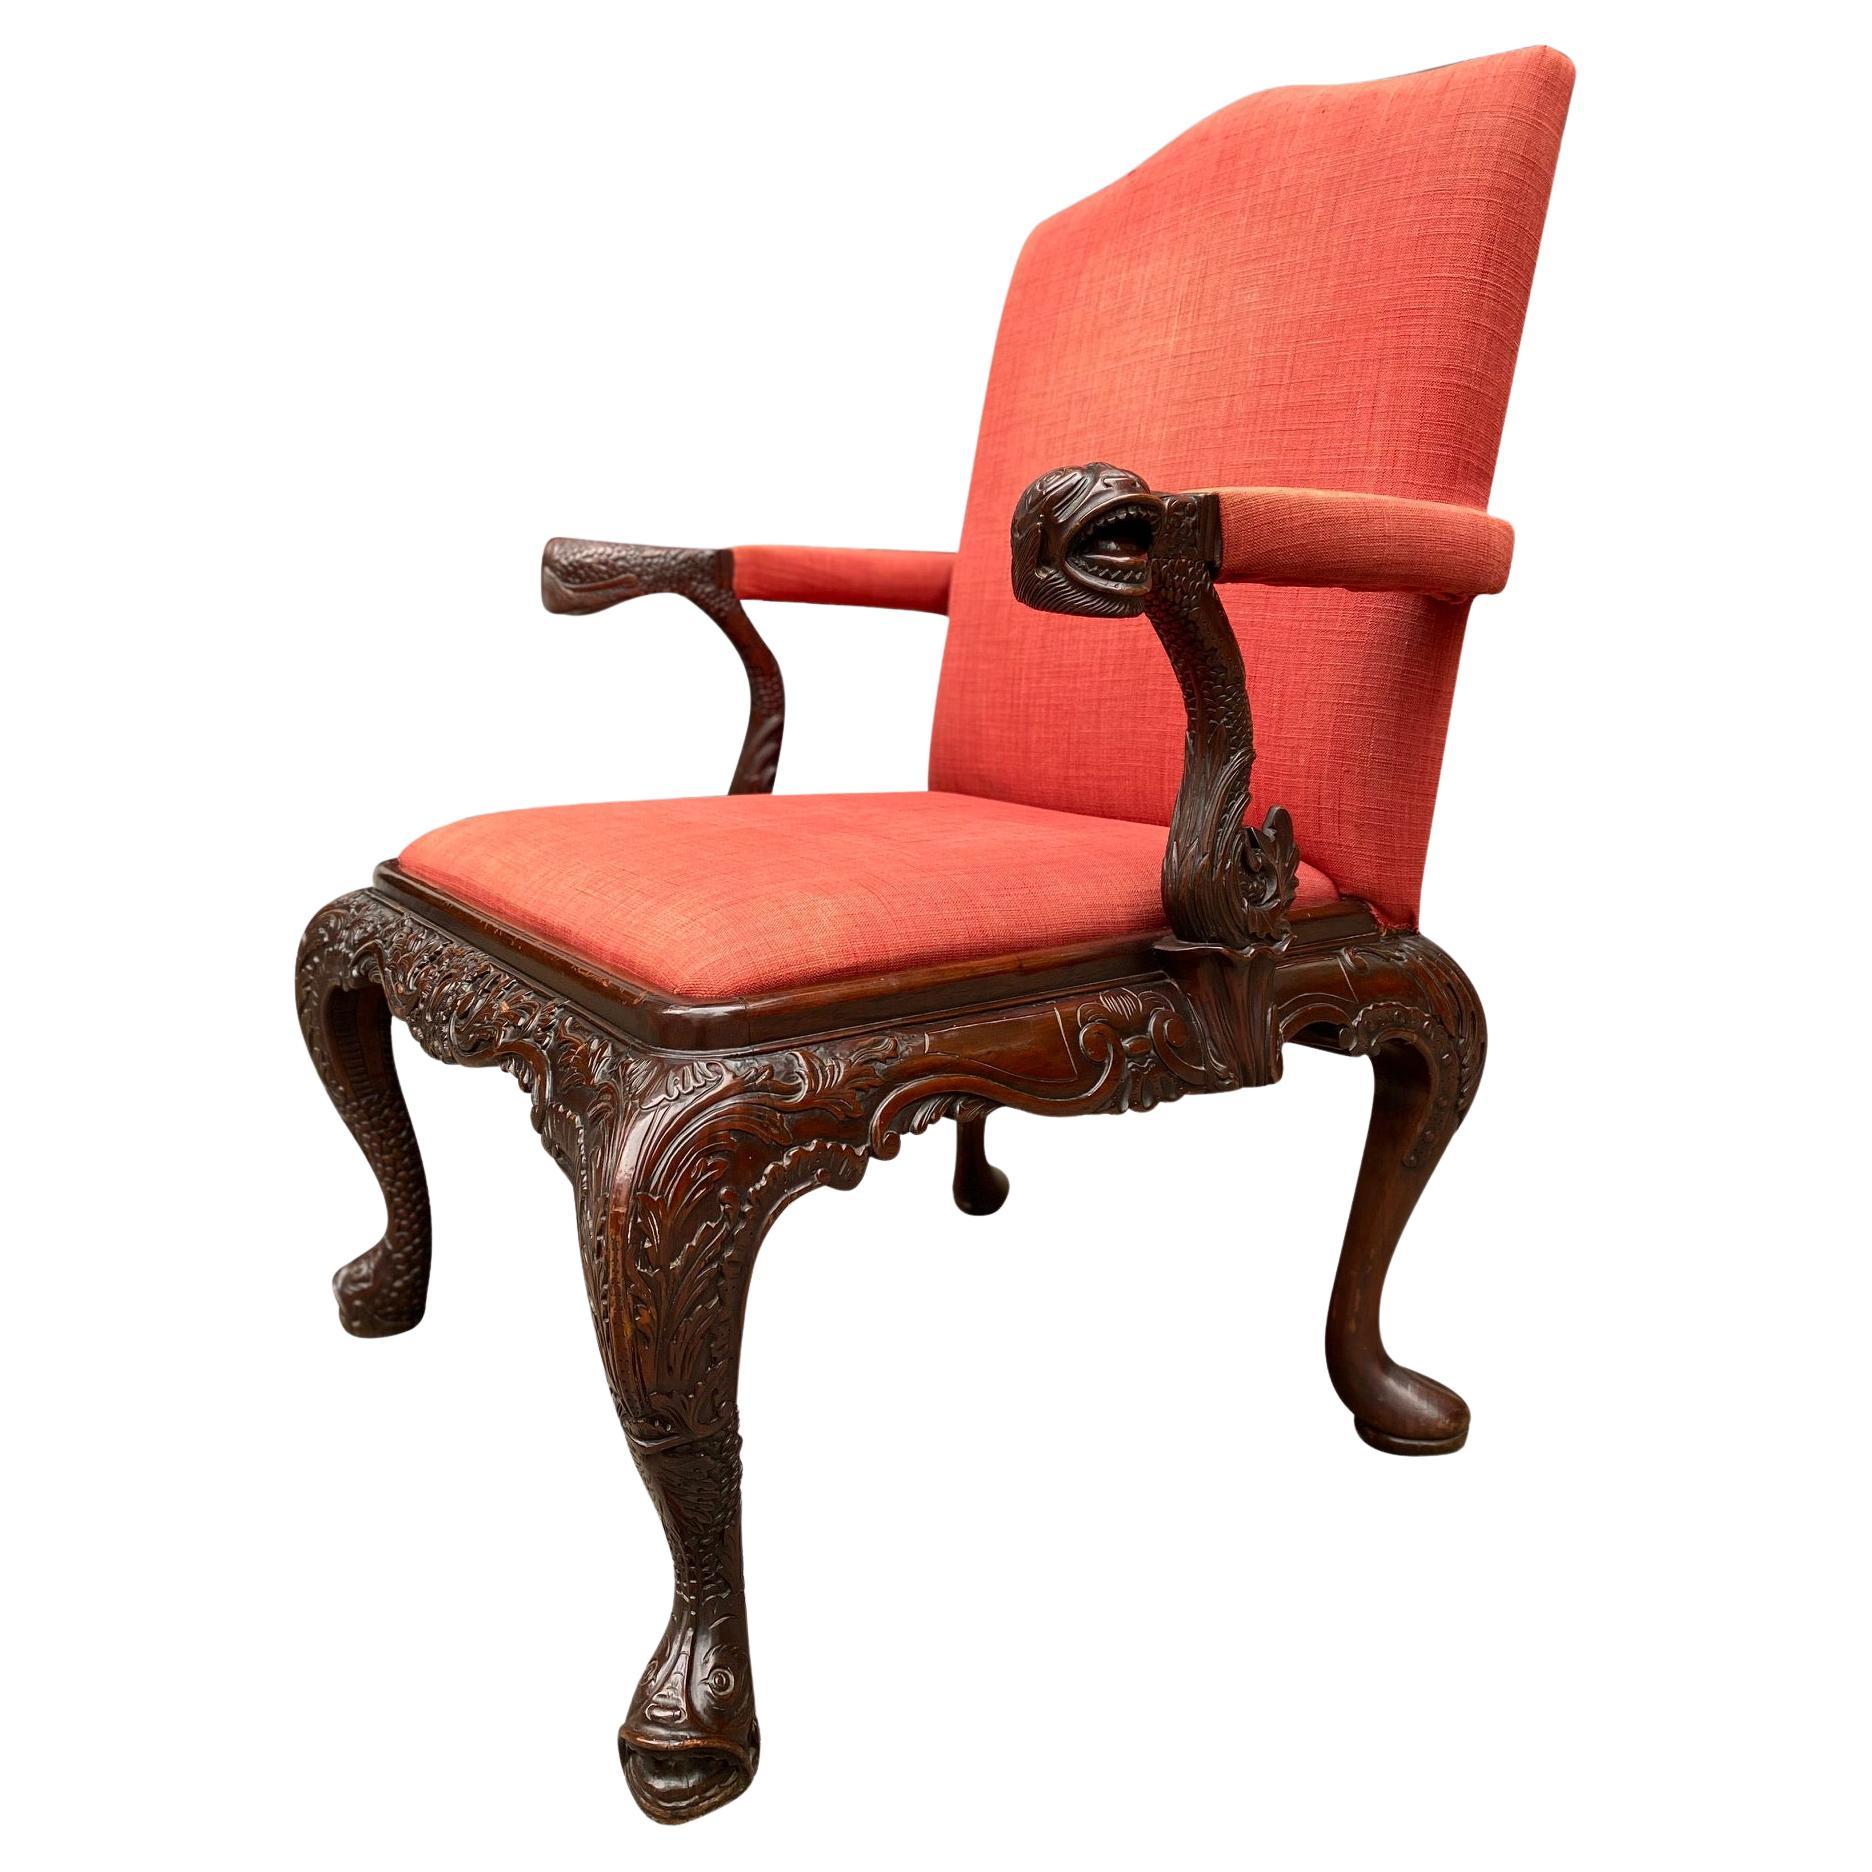 A superb quality late 19th century carved mahogany Gainsborough armchair, the camel high back flanked by arms with upholstered elbow pads and carved animal figures raised on carved scrolled uprights, the drop in seat above a wide foliate carved